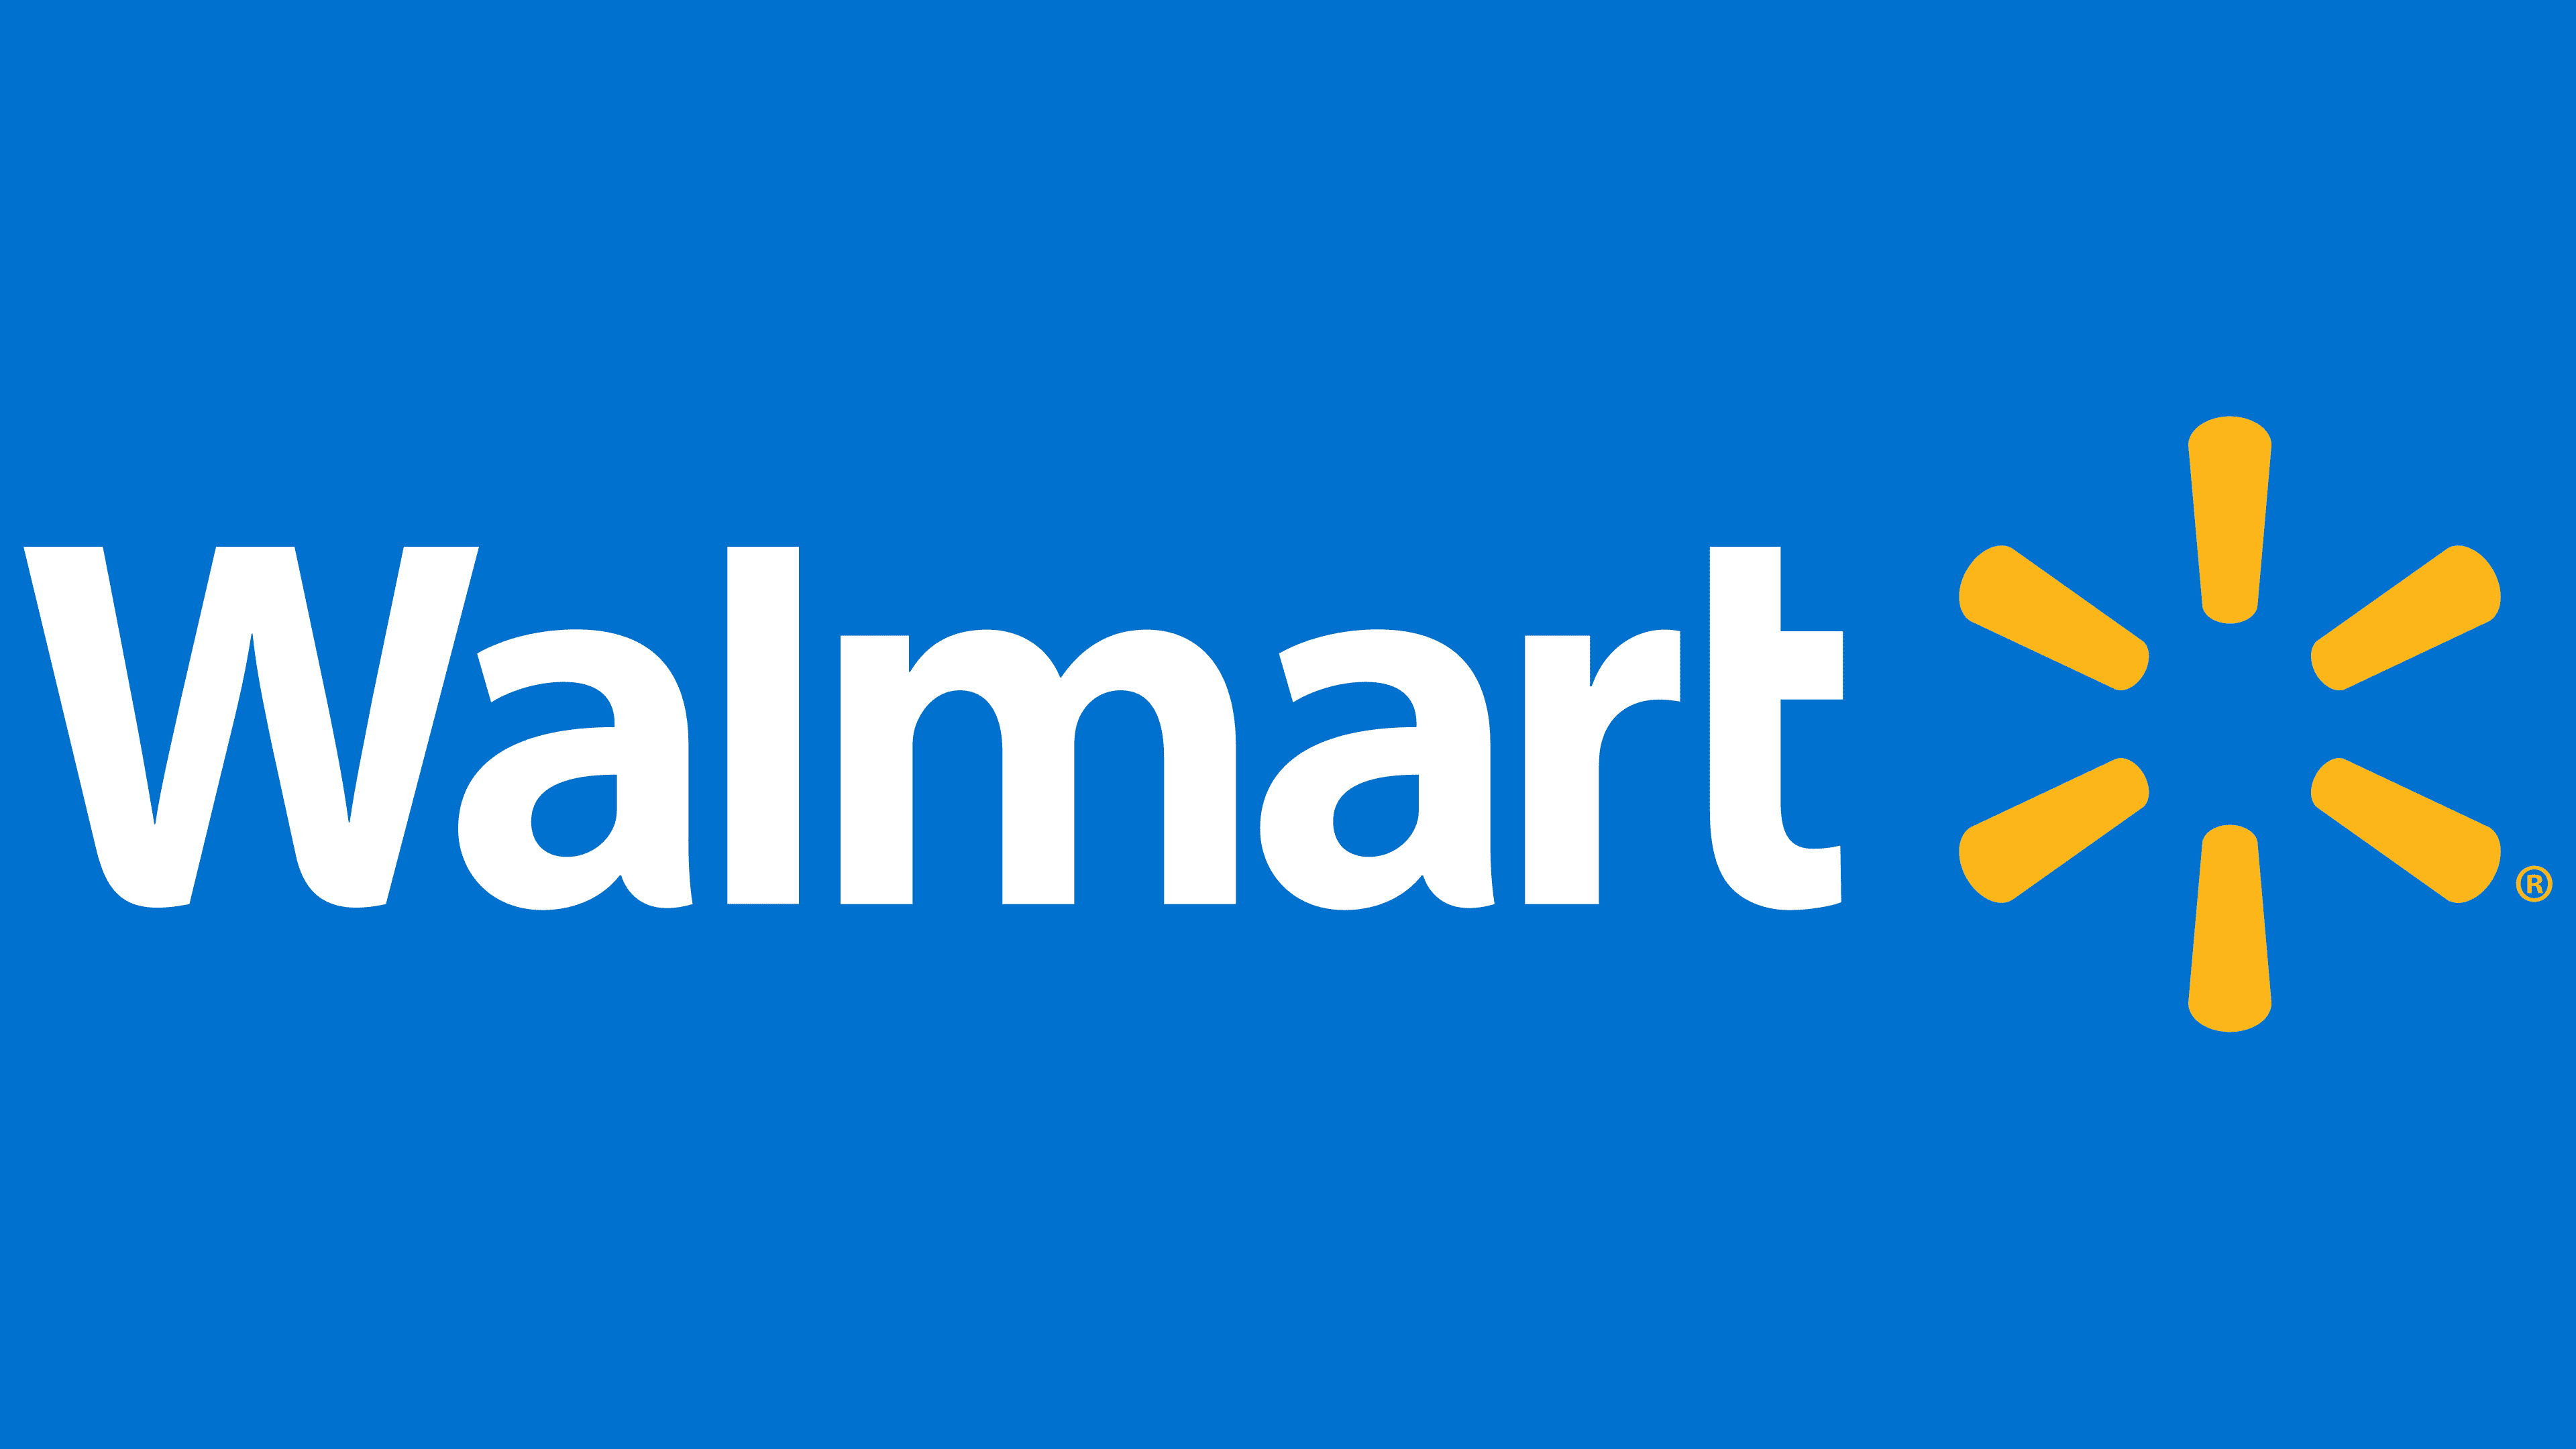 Walmart: The most successful chain of stores in the world today. 3840x2160 4K Wallpaper.